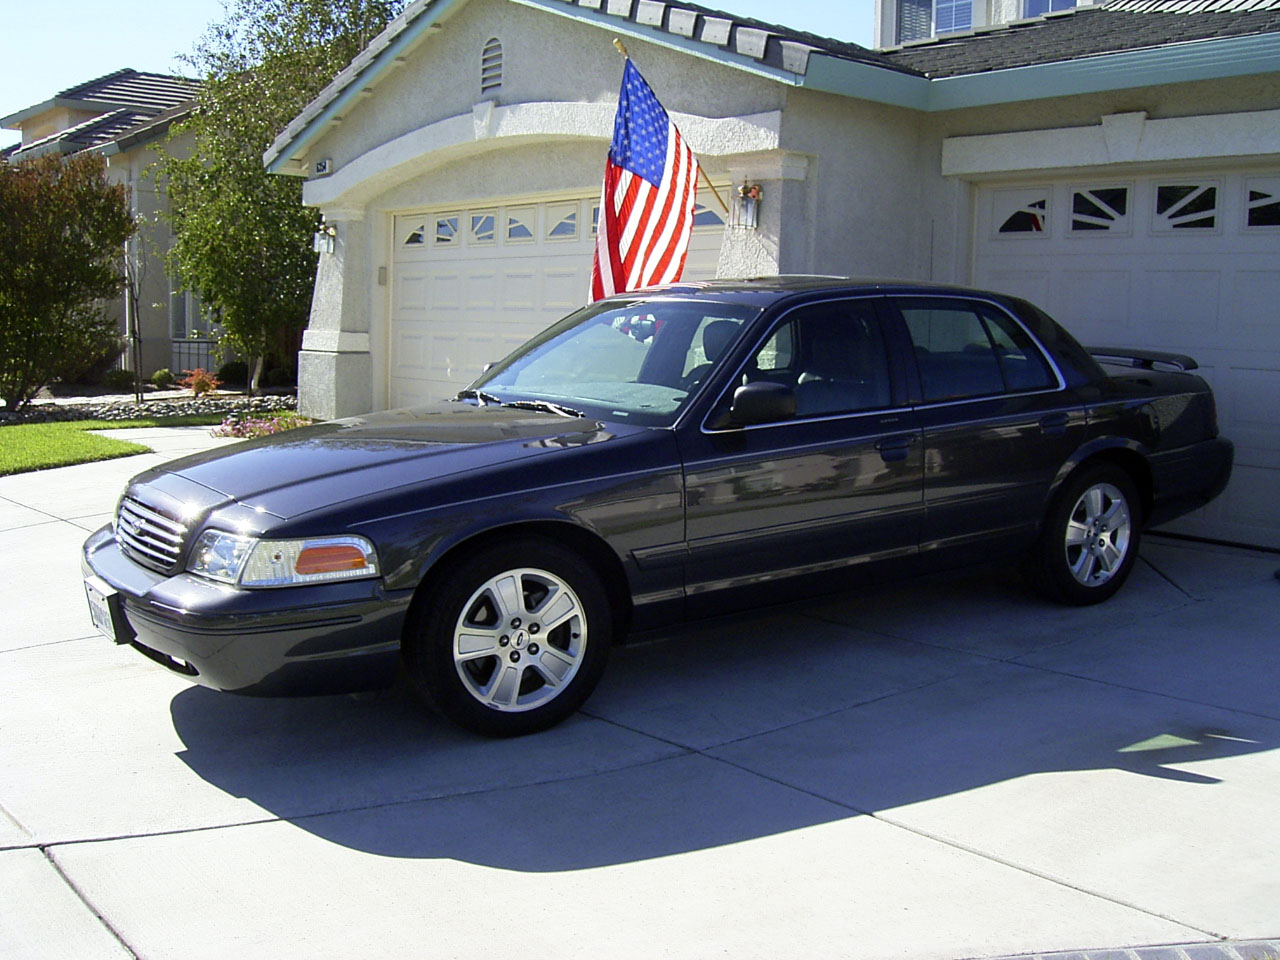  2005 Ford Crown Victoria 6 psi Supercharged LX Sport